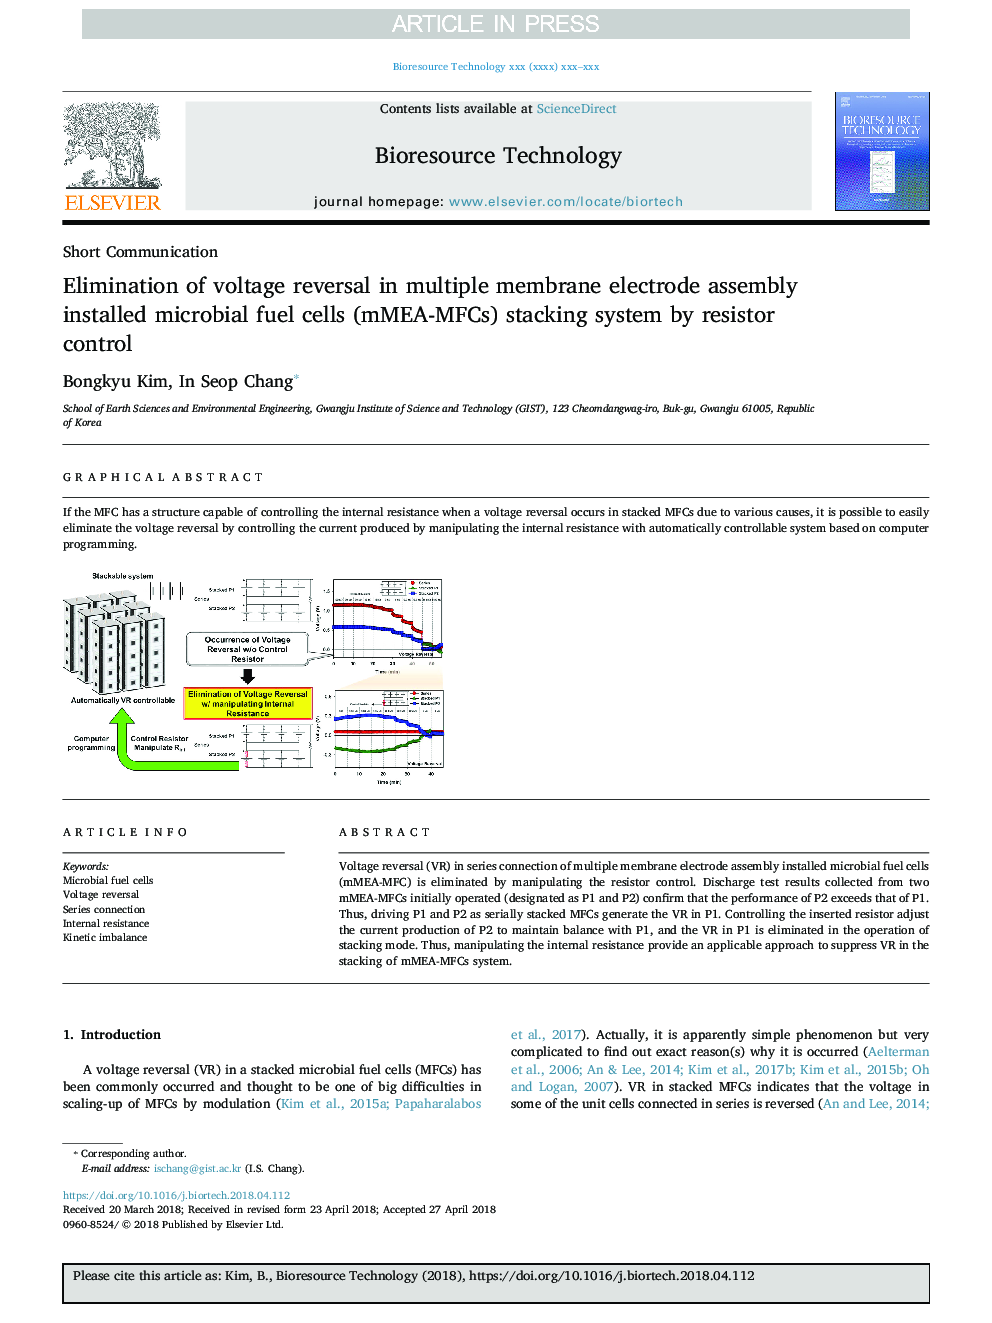 Elimination of voltage reversal in multiple membrane electrode assembly installed microbial fuel cells (mMEA-MFCs) stacking system by resistor control